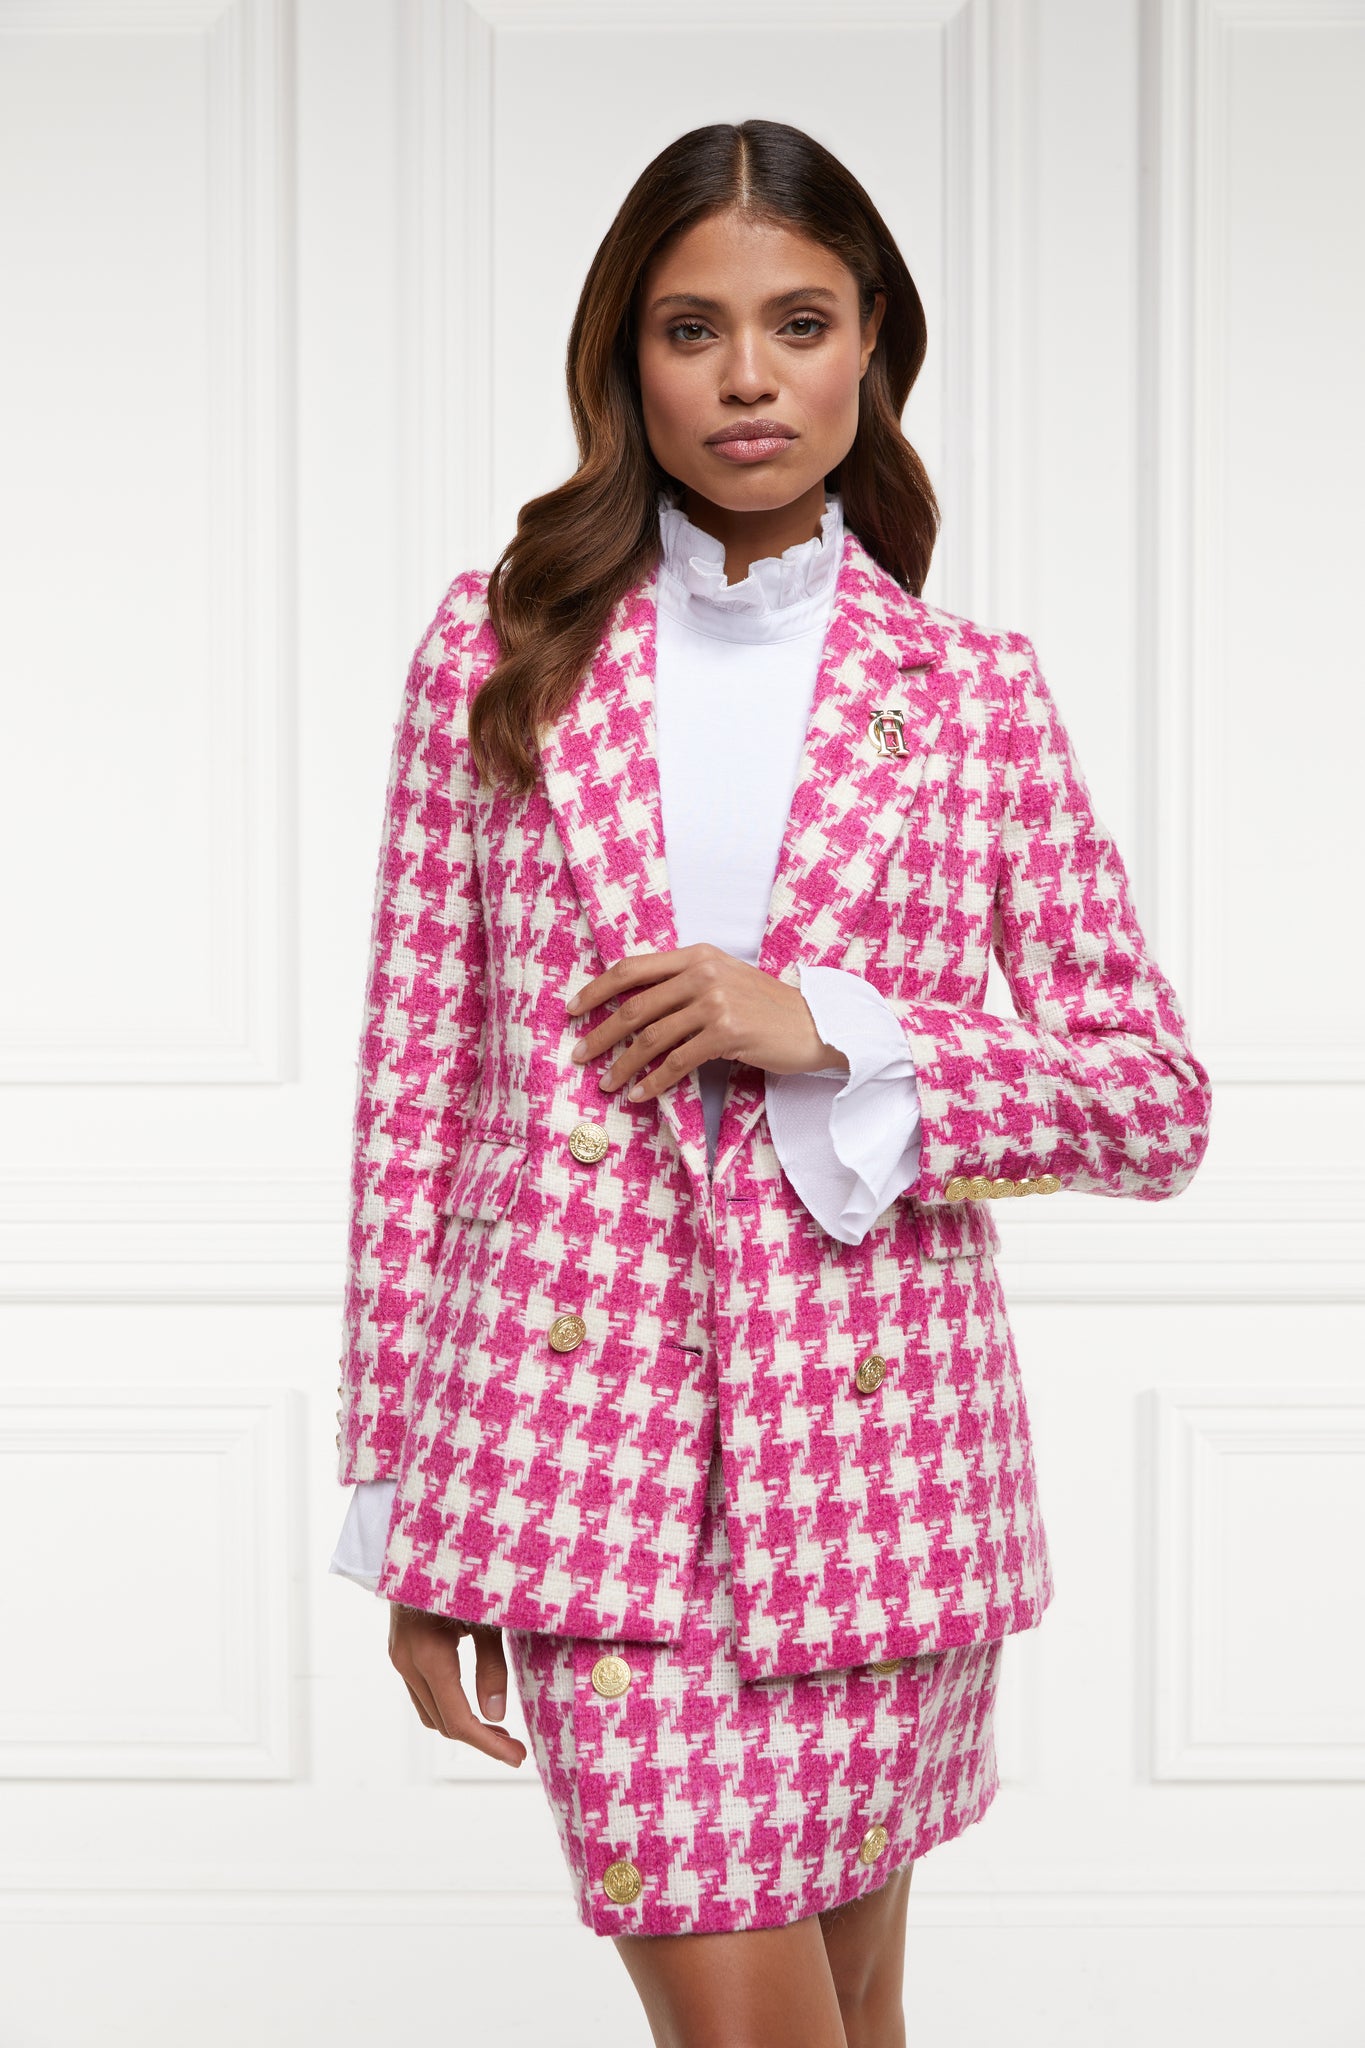 double breasted wool blazer in hot pink large scale houndstooth with two hip pockets and gold button detials down front and on cuffs and handmade in the uk